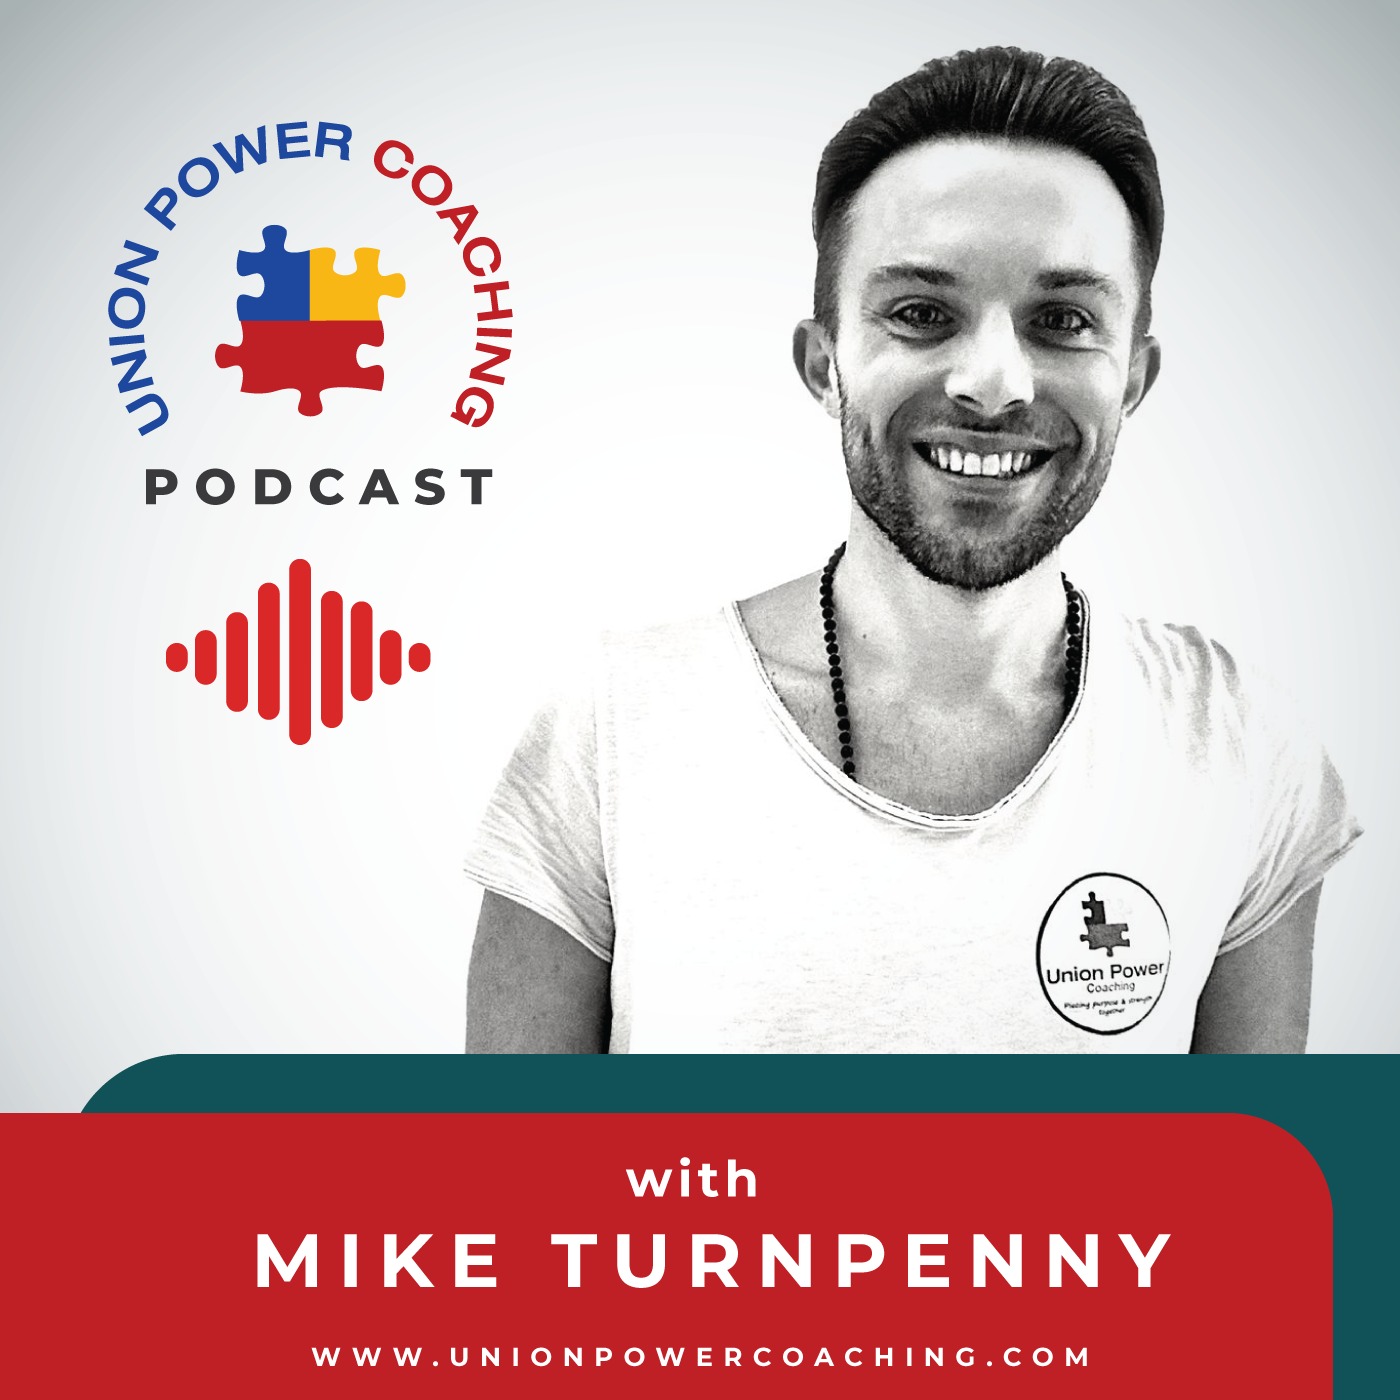 Mike Turnpenny